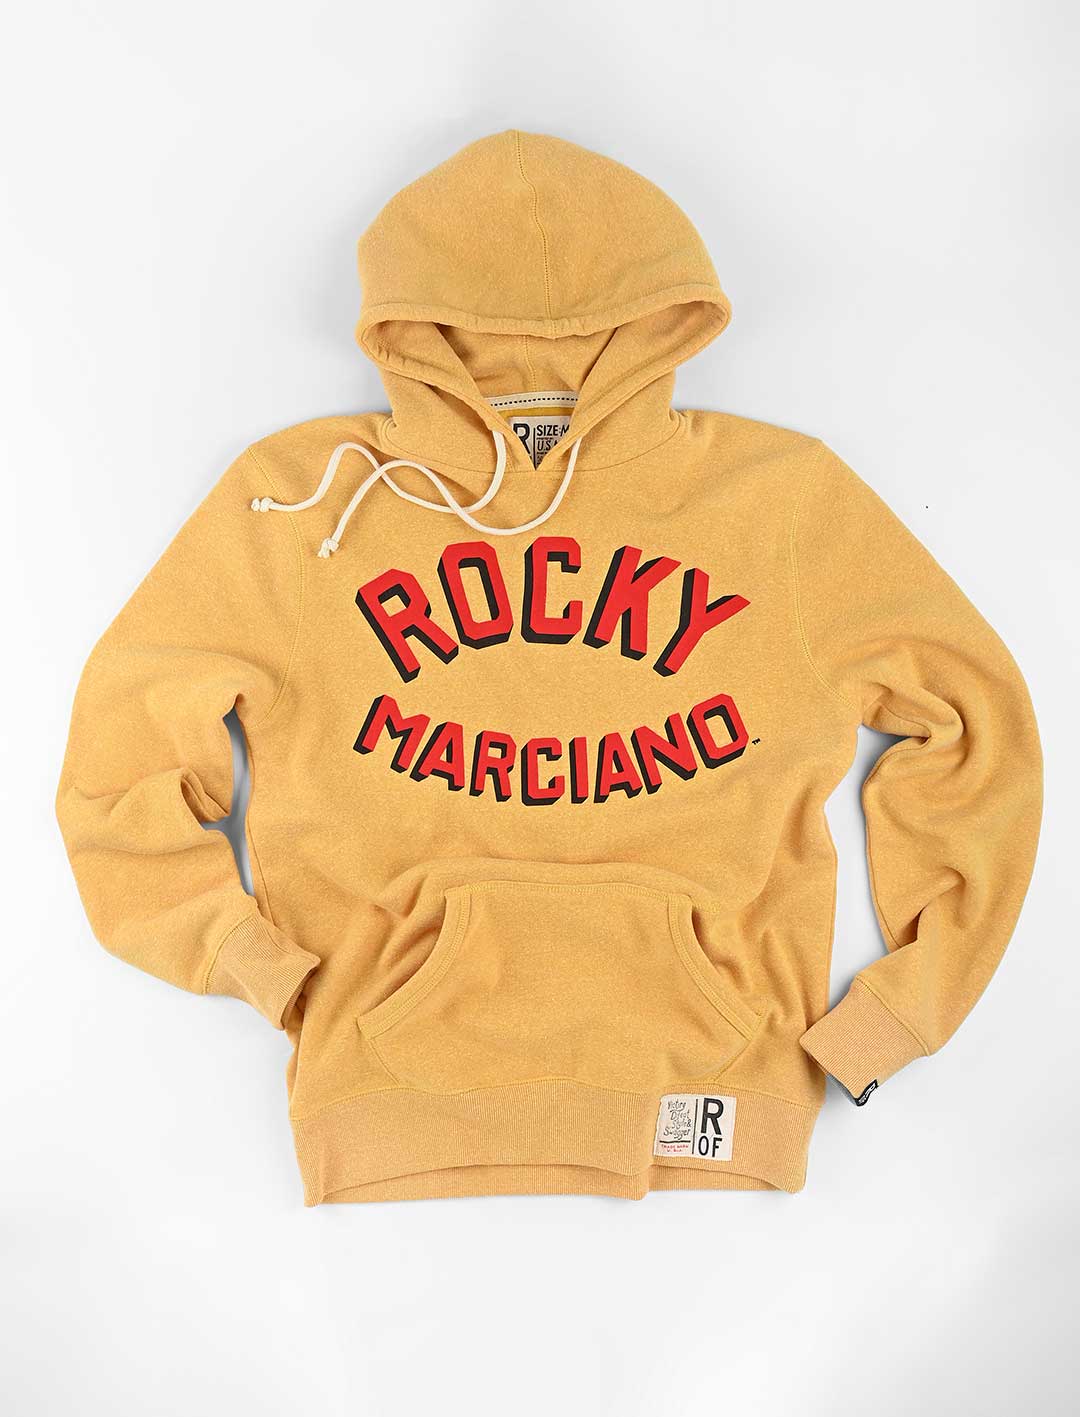 Rocky Marciano Undefeated Yellow PO Hoody - Roots of Fight